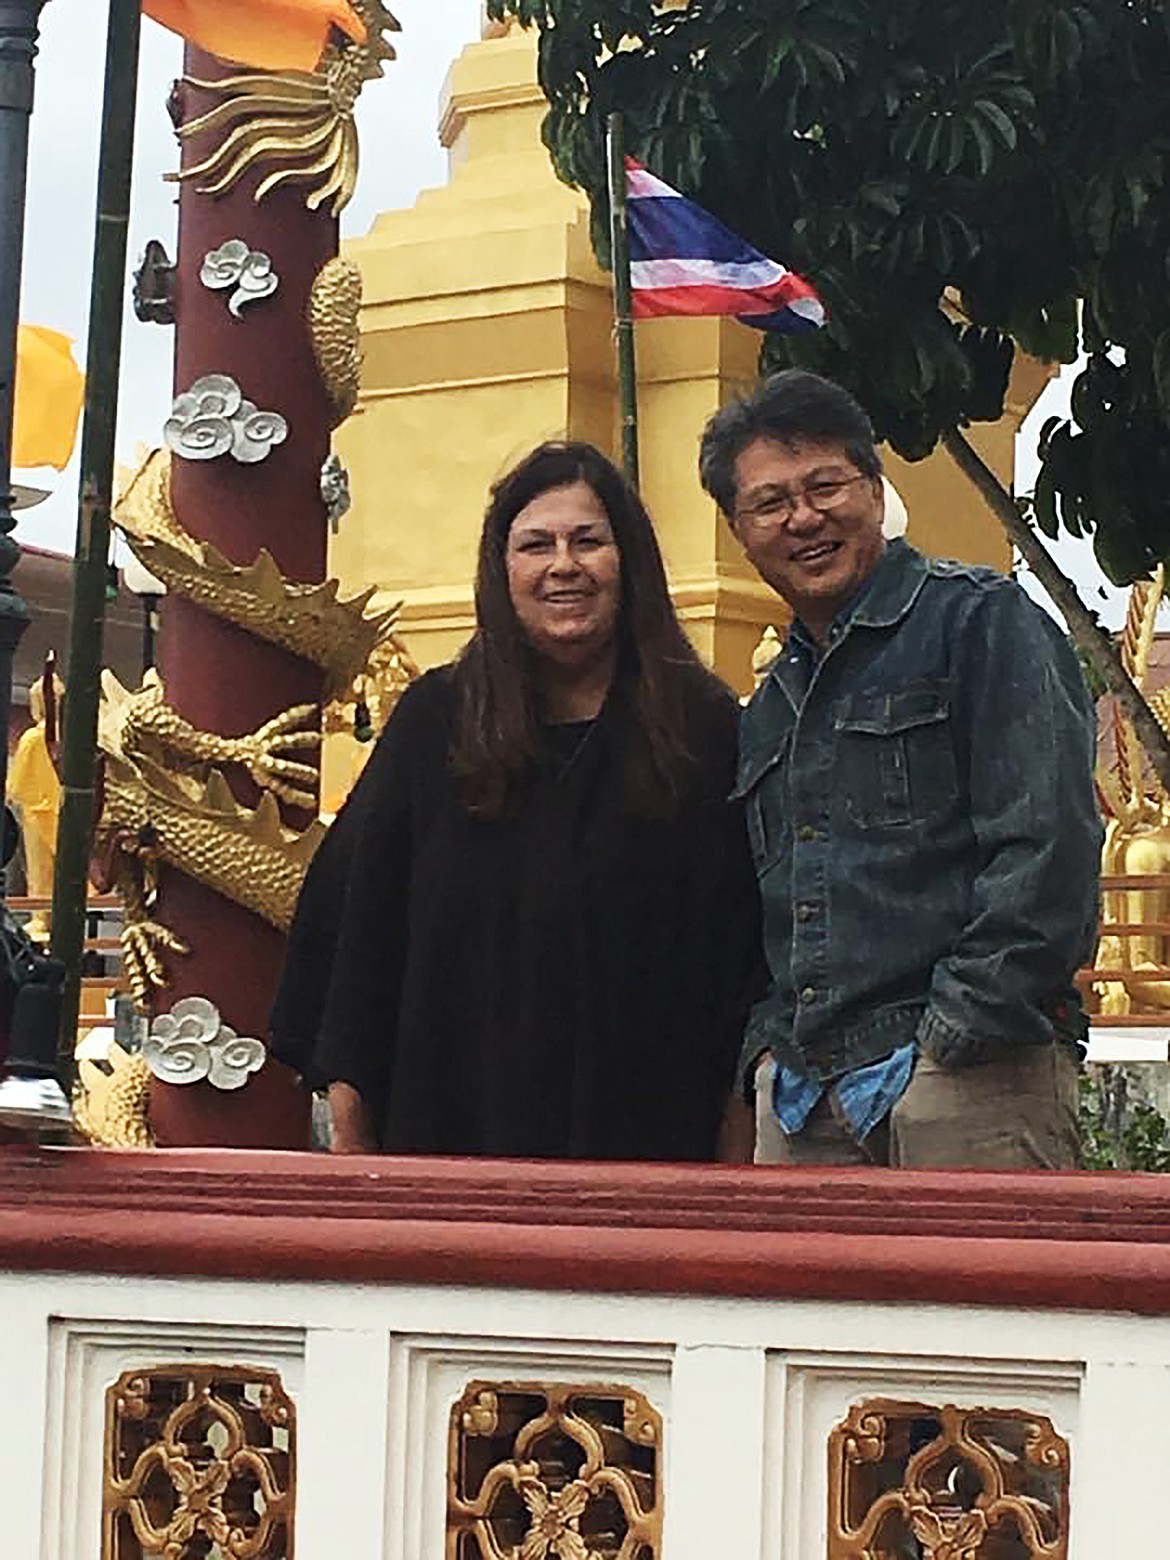 Paula and David Mahawon are pictured at the Buddhist Temple in Thaton, Chiang Mai Province in Thailand.